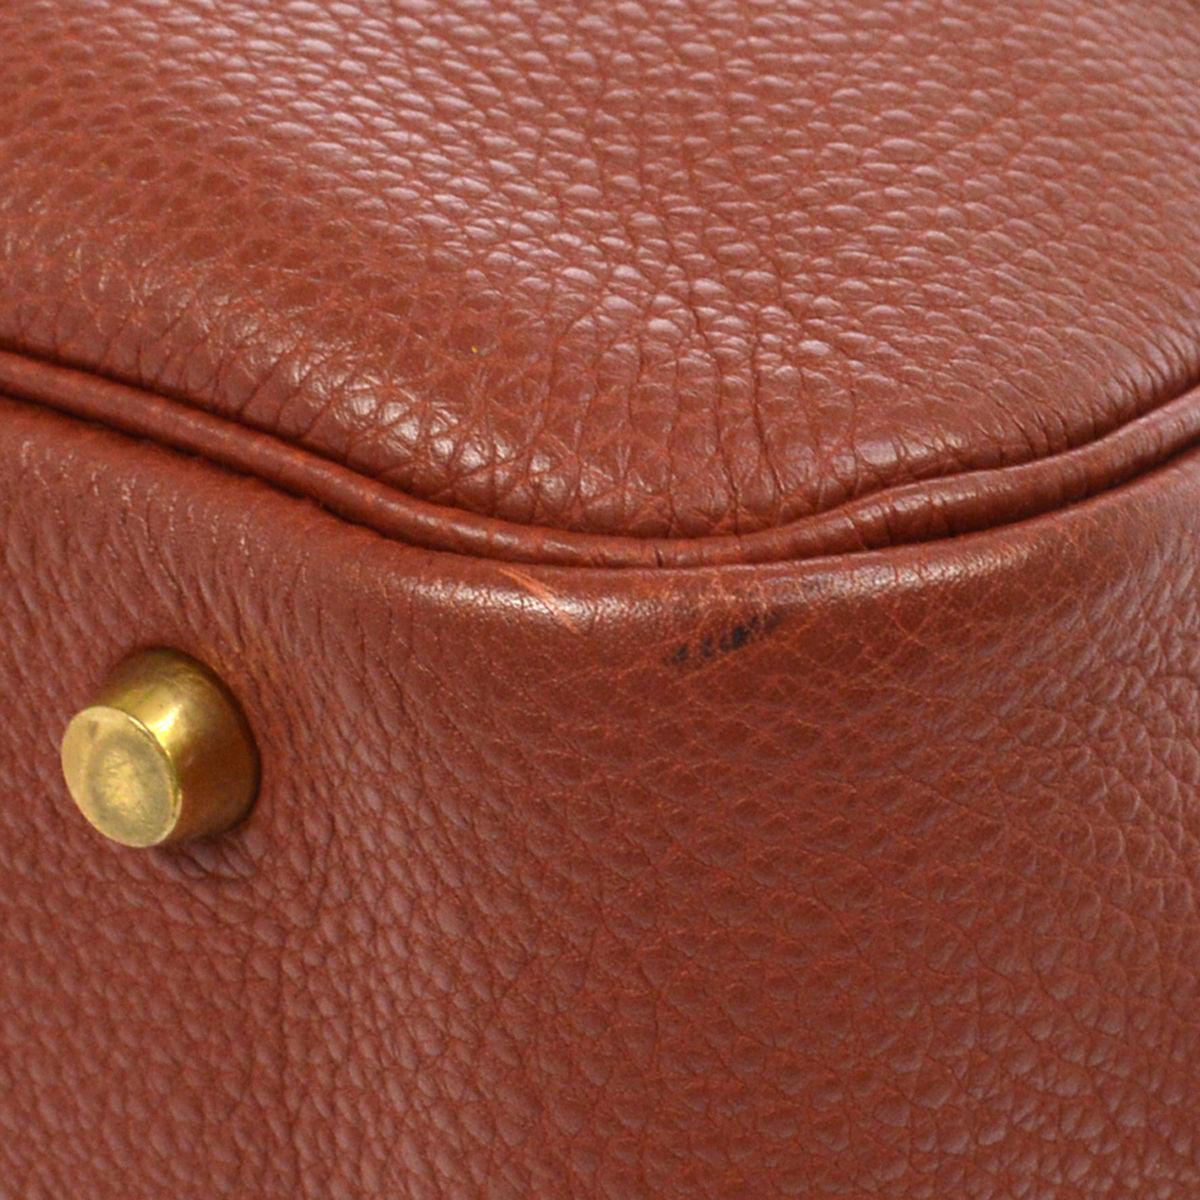 Women's Hermes Leather Gold Carryall Bowling Evening Top Handle Satchel Bag 